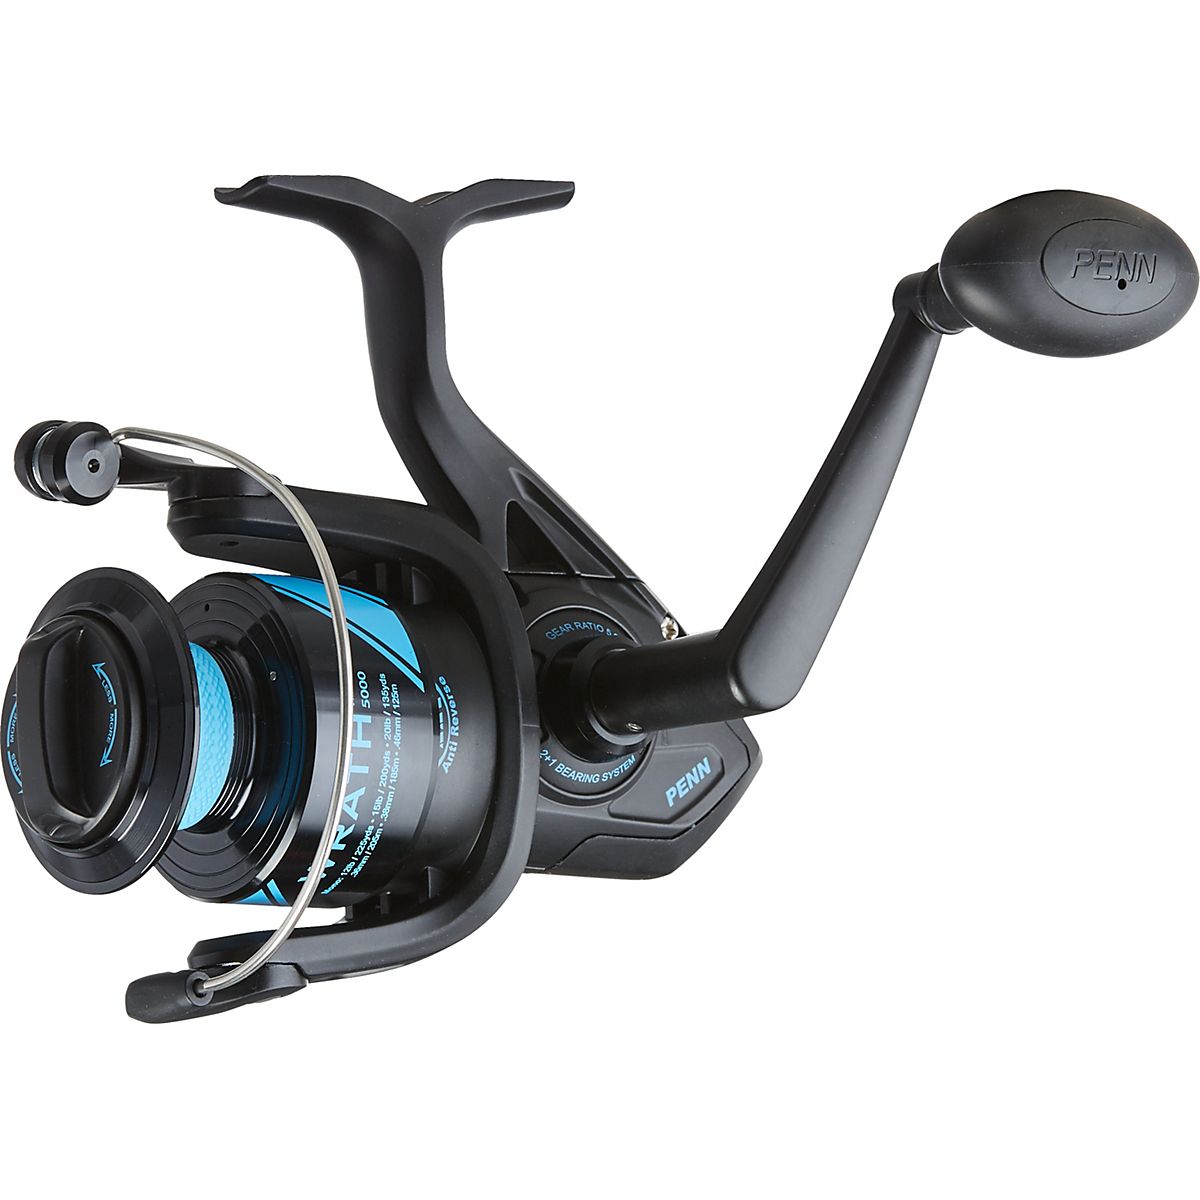 PENN Wrath Spinning Reel  Free Shipping at Academy